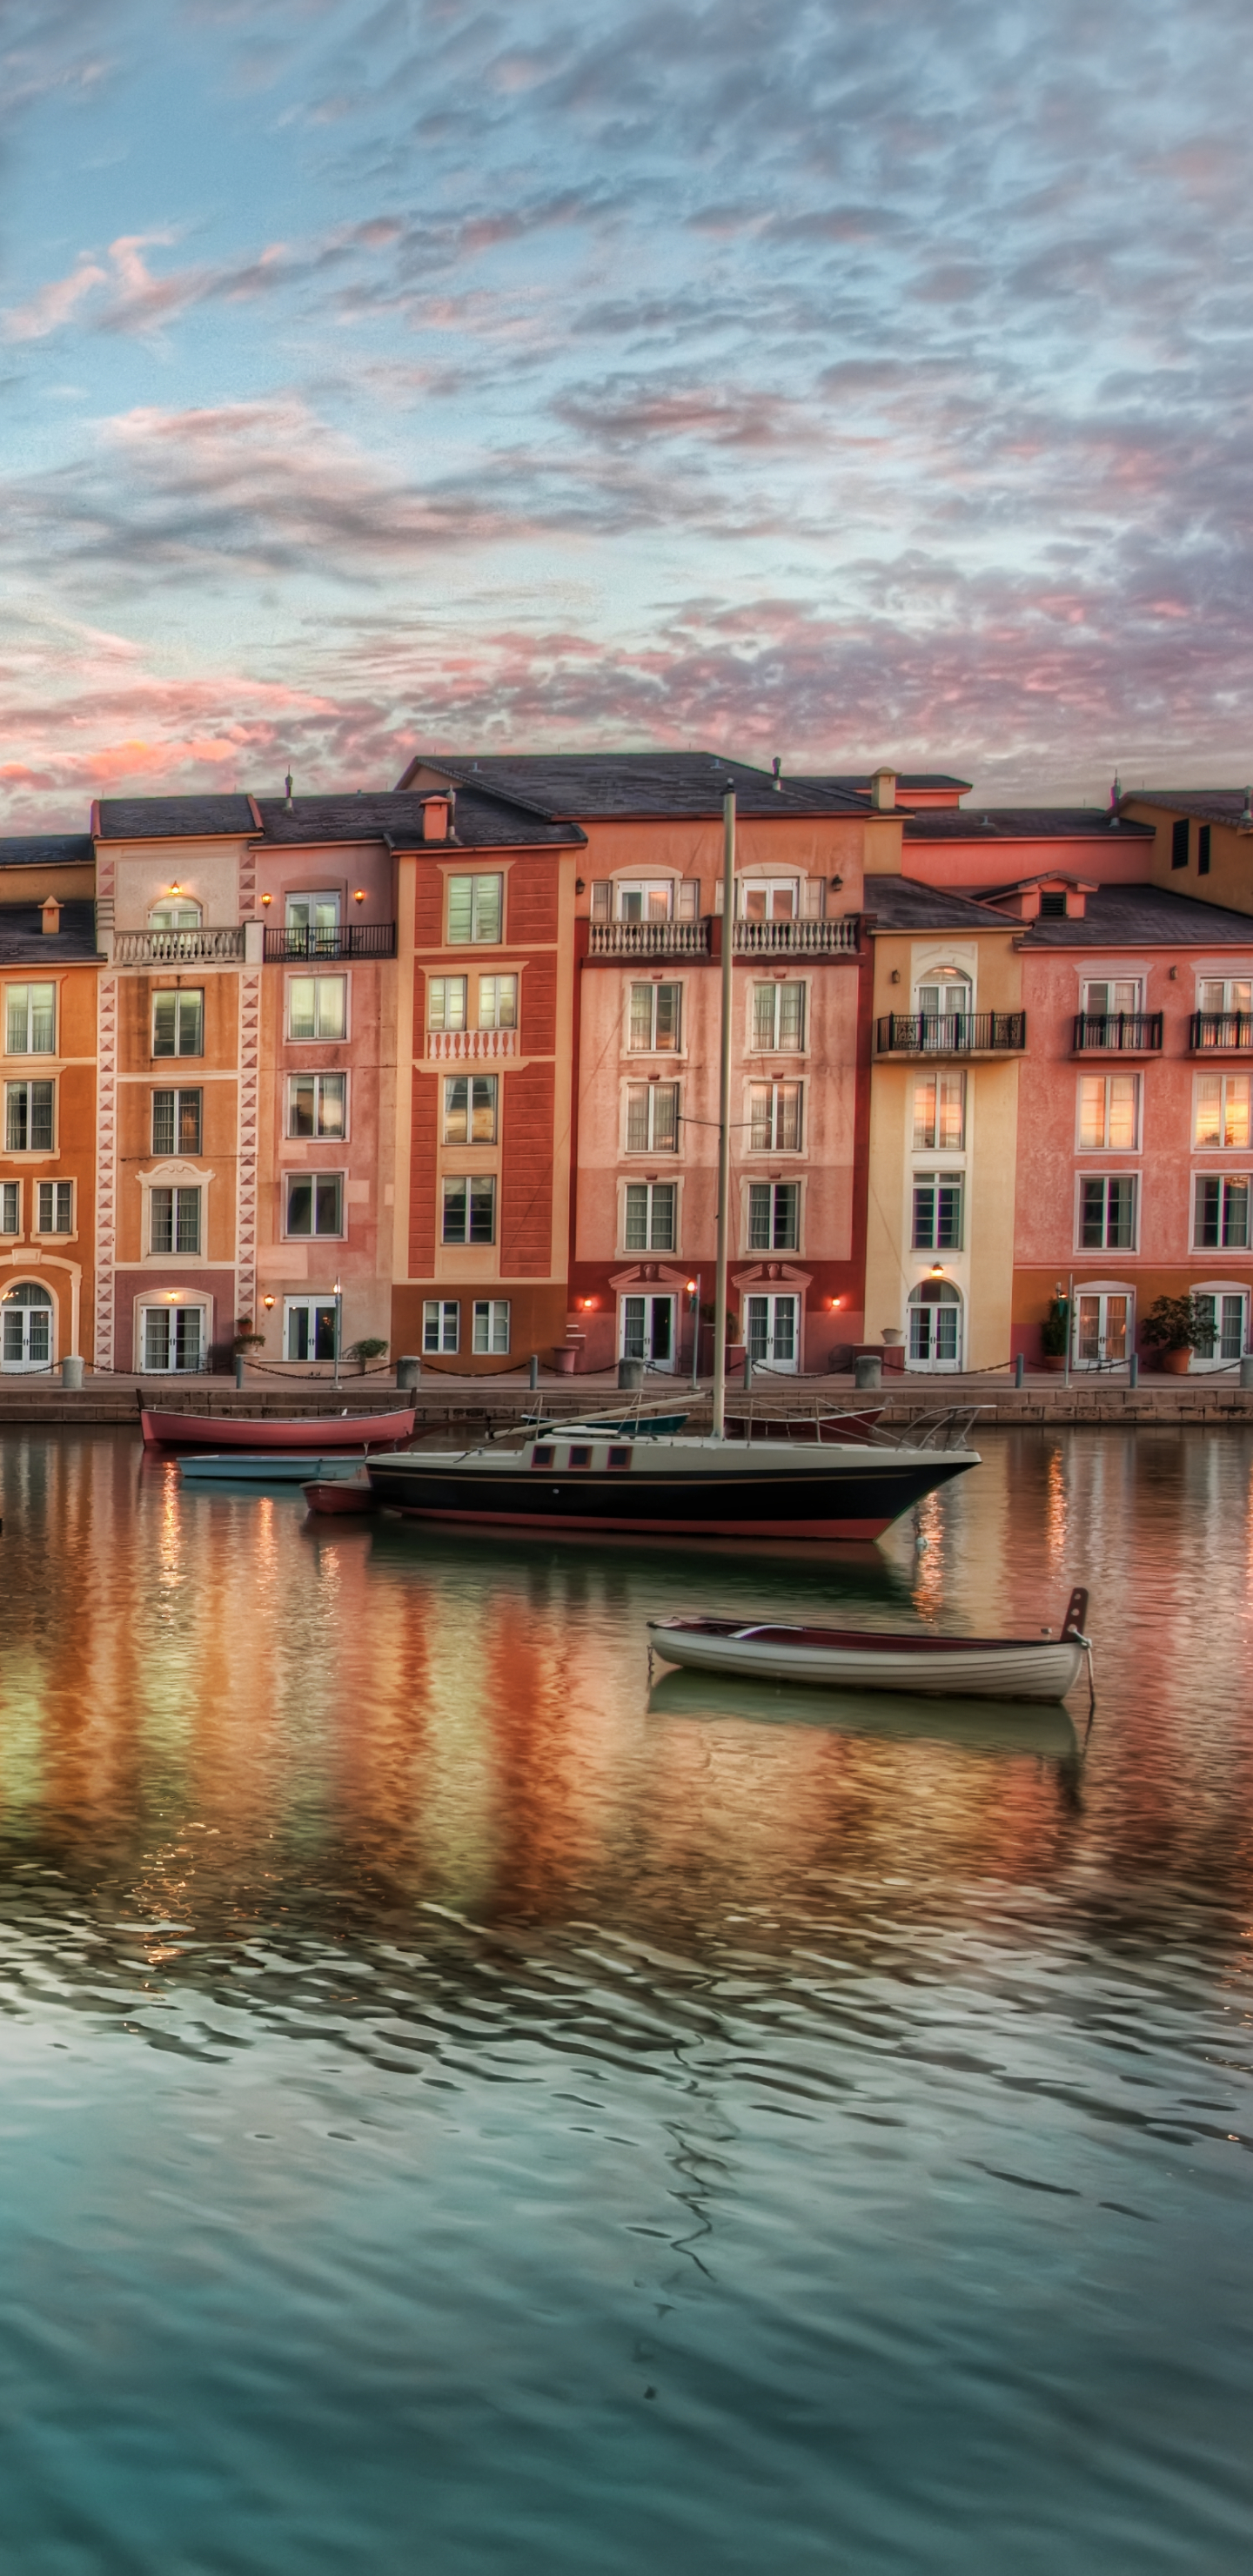 man made, town, boat, florida, hdr, orlando, building, house, towns